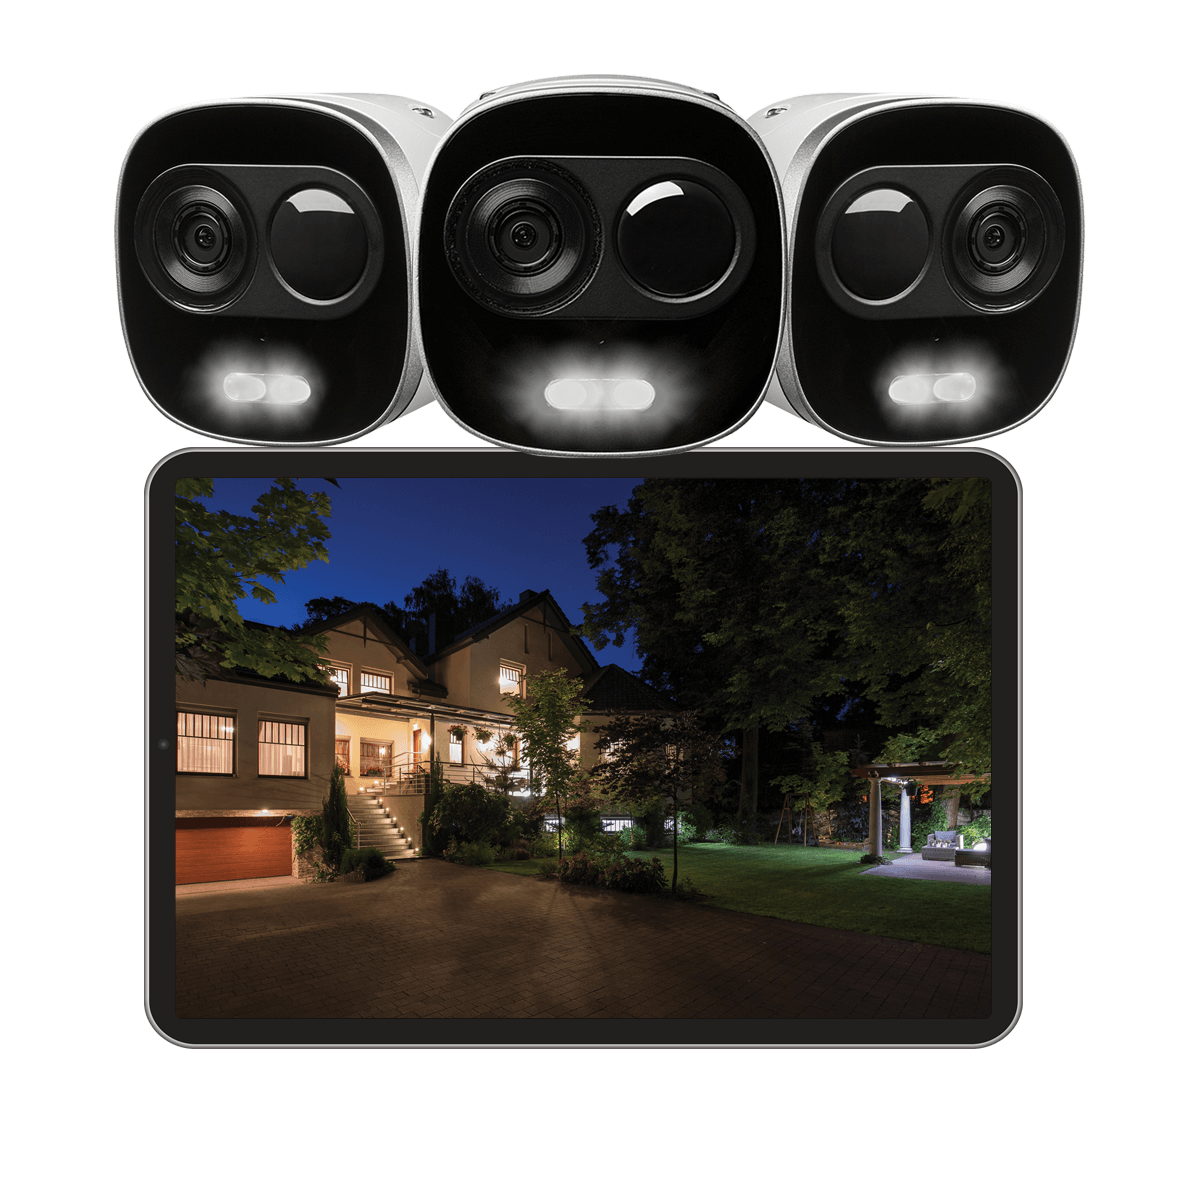 4K Ultra HD IP Color Night Vision Security Camera